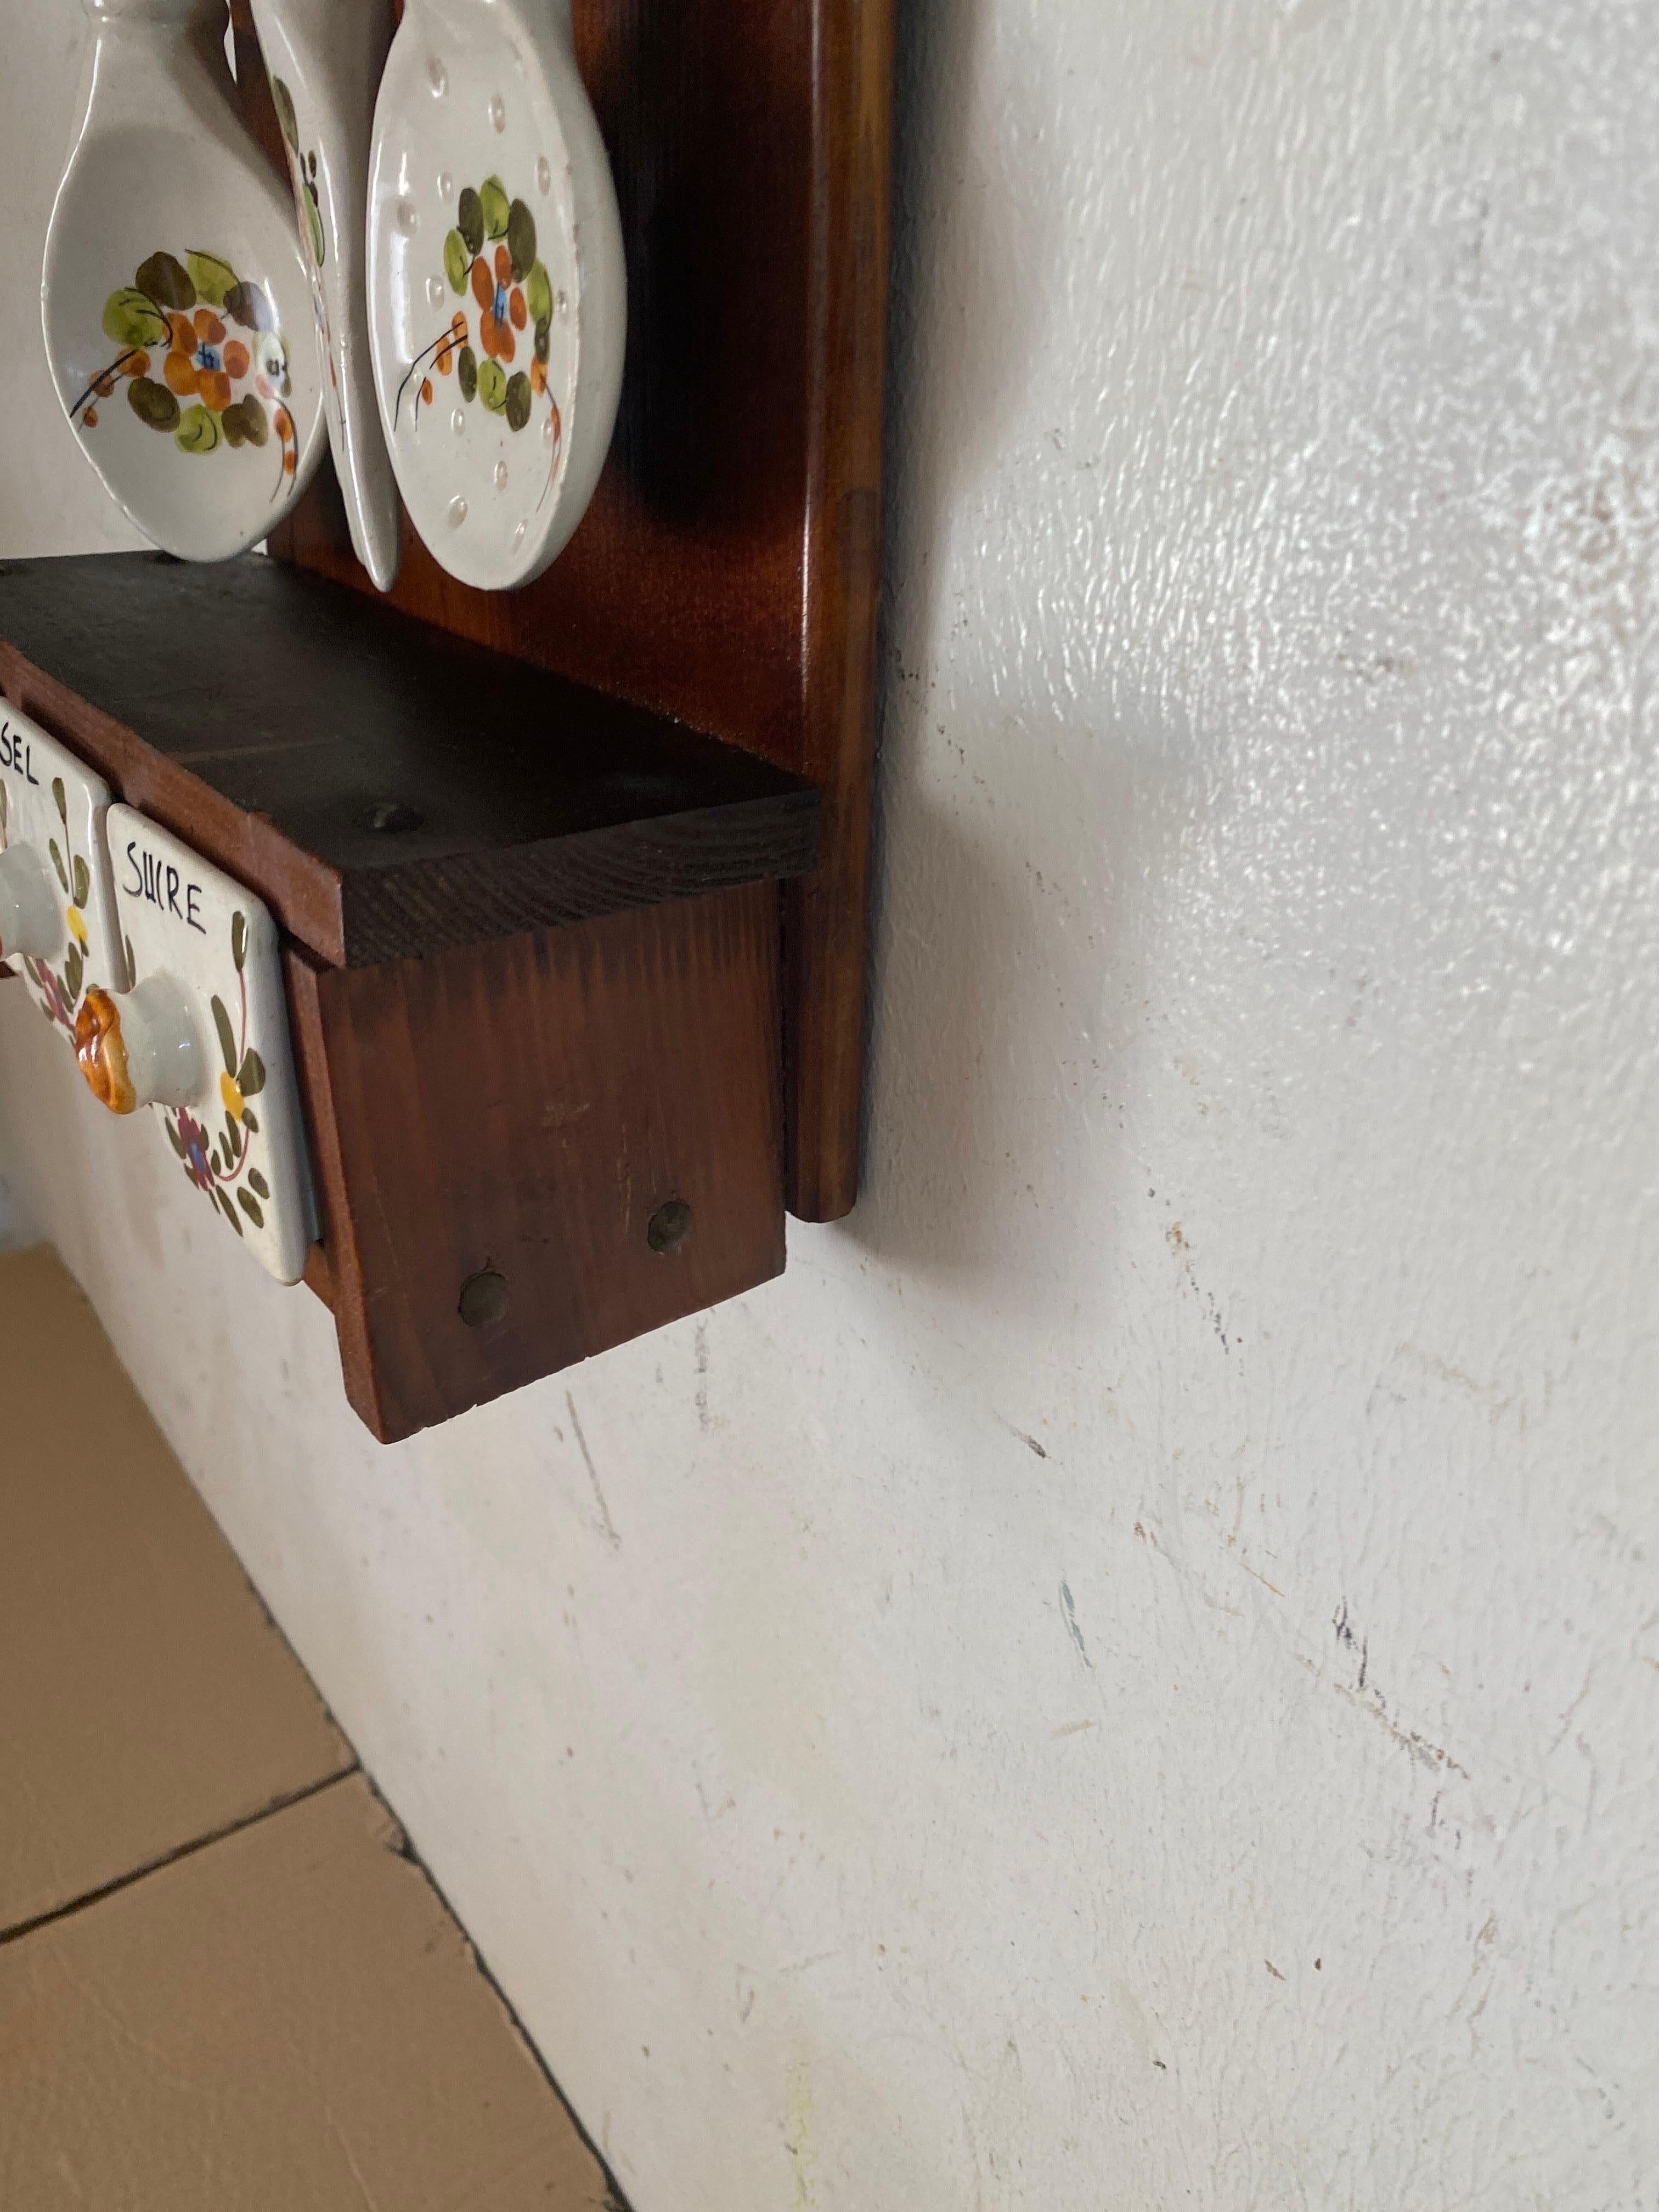 Salt Sugar and Coffee Boxes Kitchen wall set in Ceramic and Wood France 1960 In Good Condition For Sale In Auribeau sur Siagne, FR